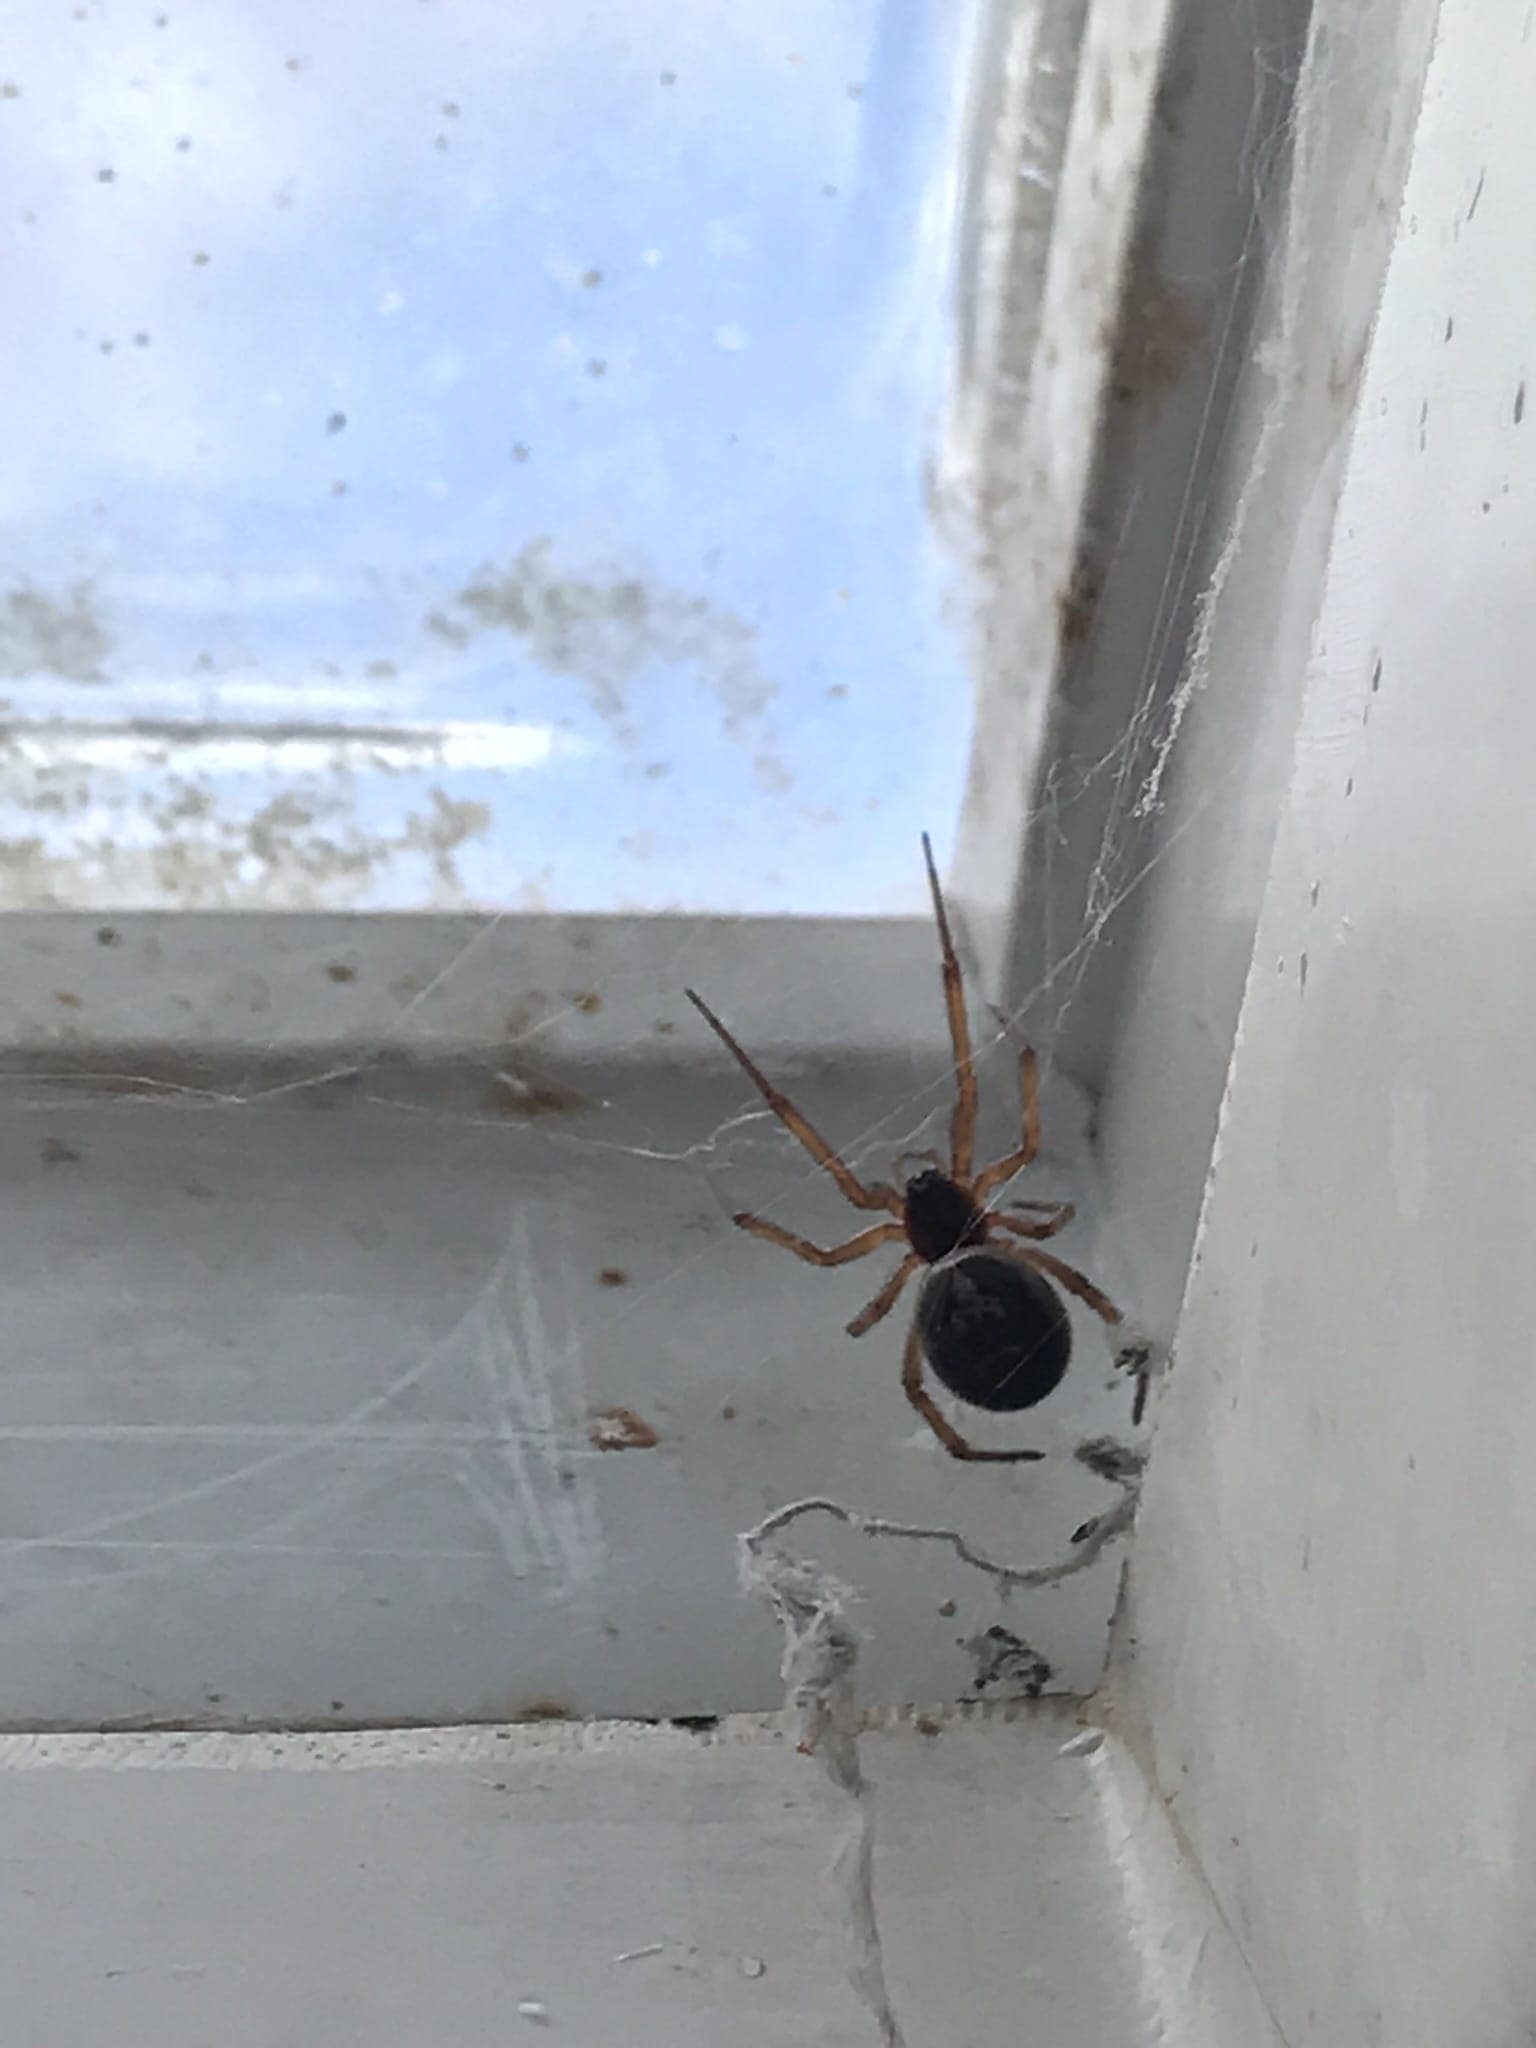 Picture of Steatoda nobilis (Noble False Widow) - Dorsal,Webs